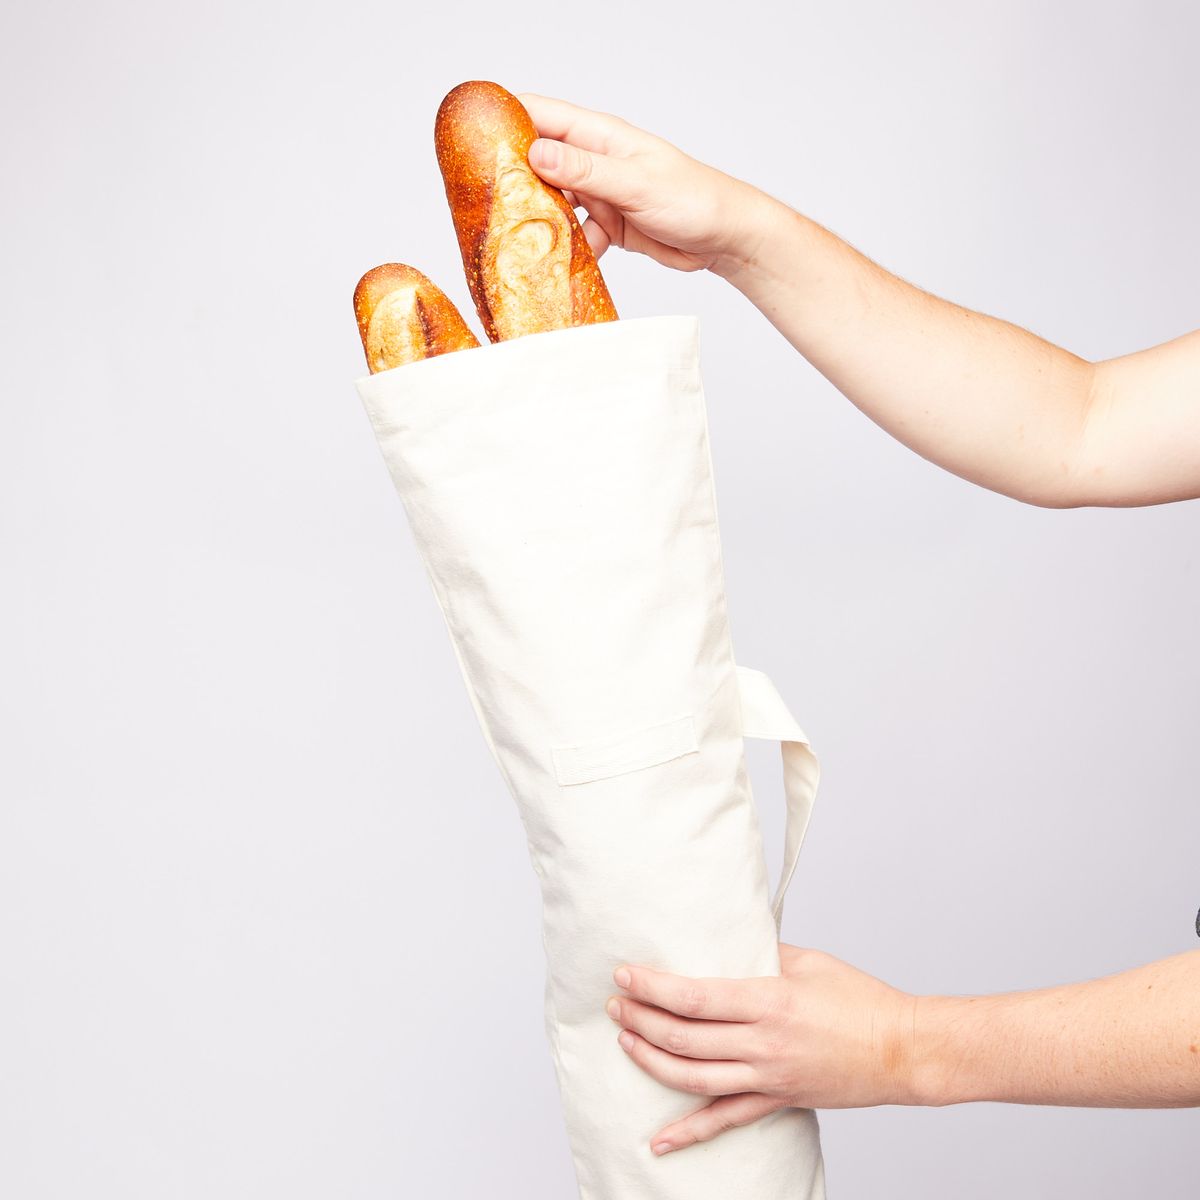 Hand pulling a baguette out of a cotton bread bag